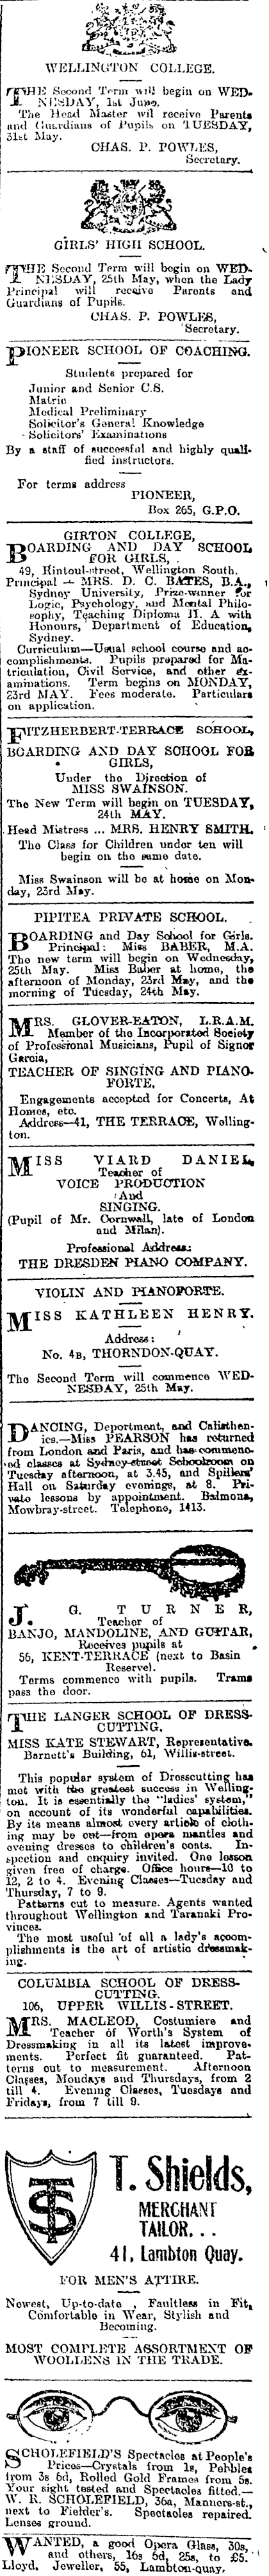 Papers Past Newspapers Evening Post 24 May 1904 Page 2 Advertisements Column 6